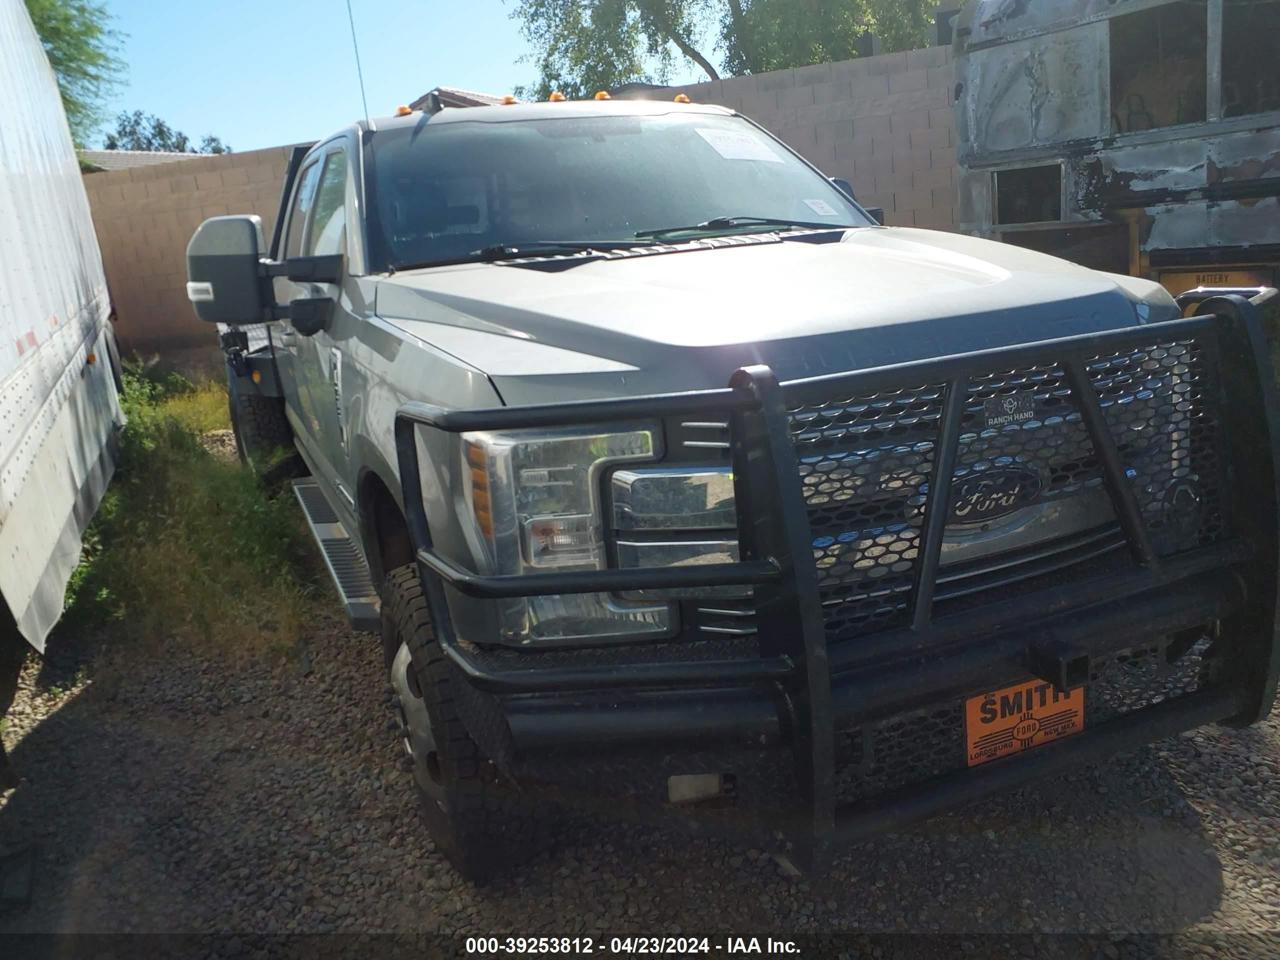 vin: 1FT8W3DTXKEE96843 1FT8W3DTXKEE96843 2019 ford f350 0 for Sale in 85041, 2299 W Broadway Rd, Phoenix, Arizona, USA